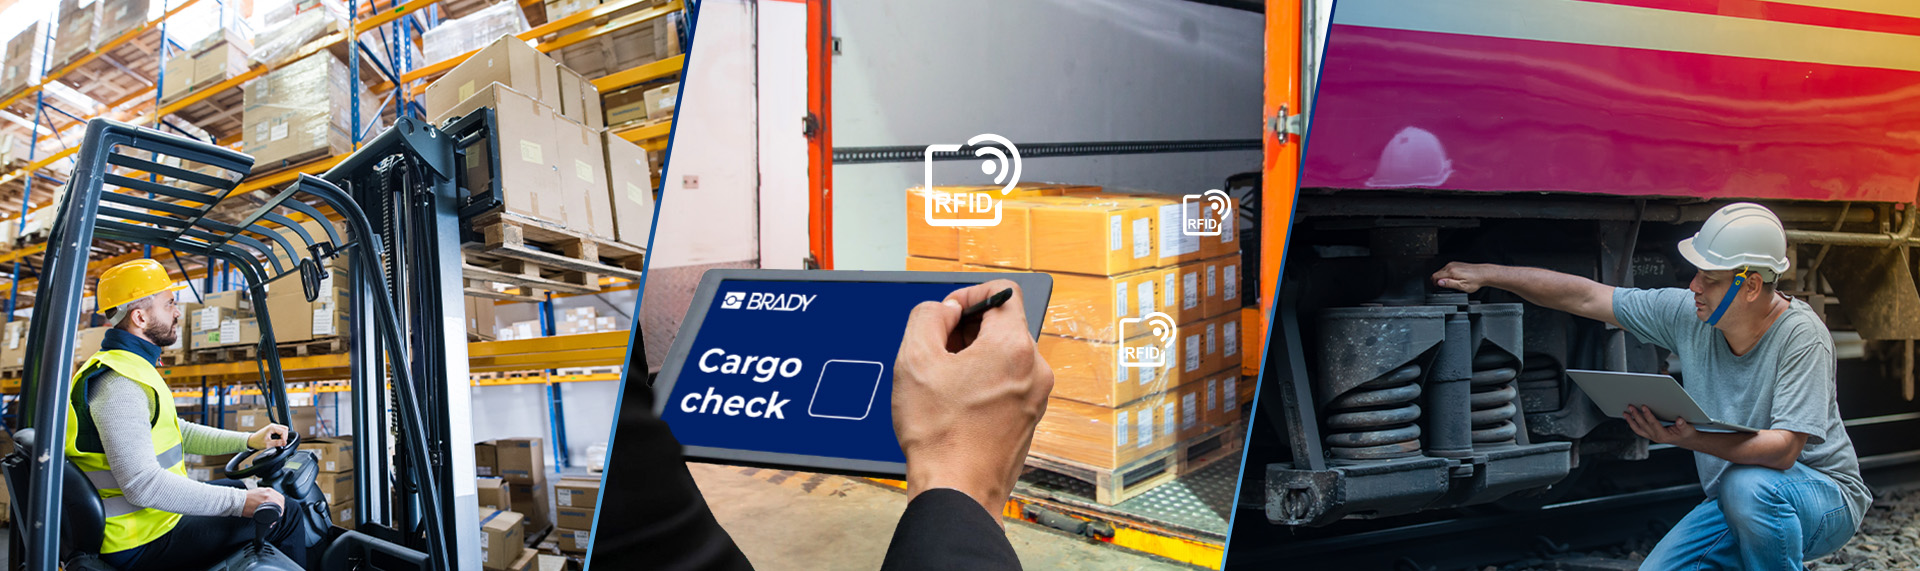 A three-image collage of RFID being used in different applications: In a warehouse, inside a semi truck, and beneath a piece of heavy machinery.